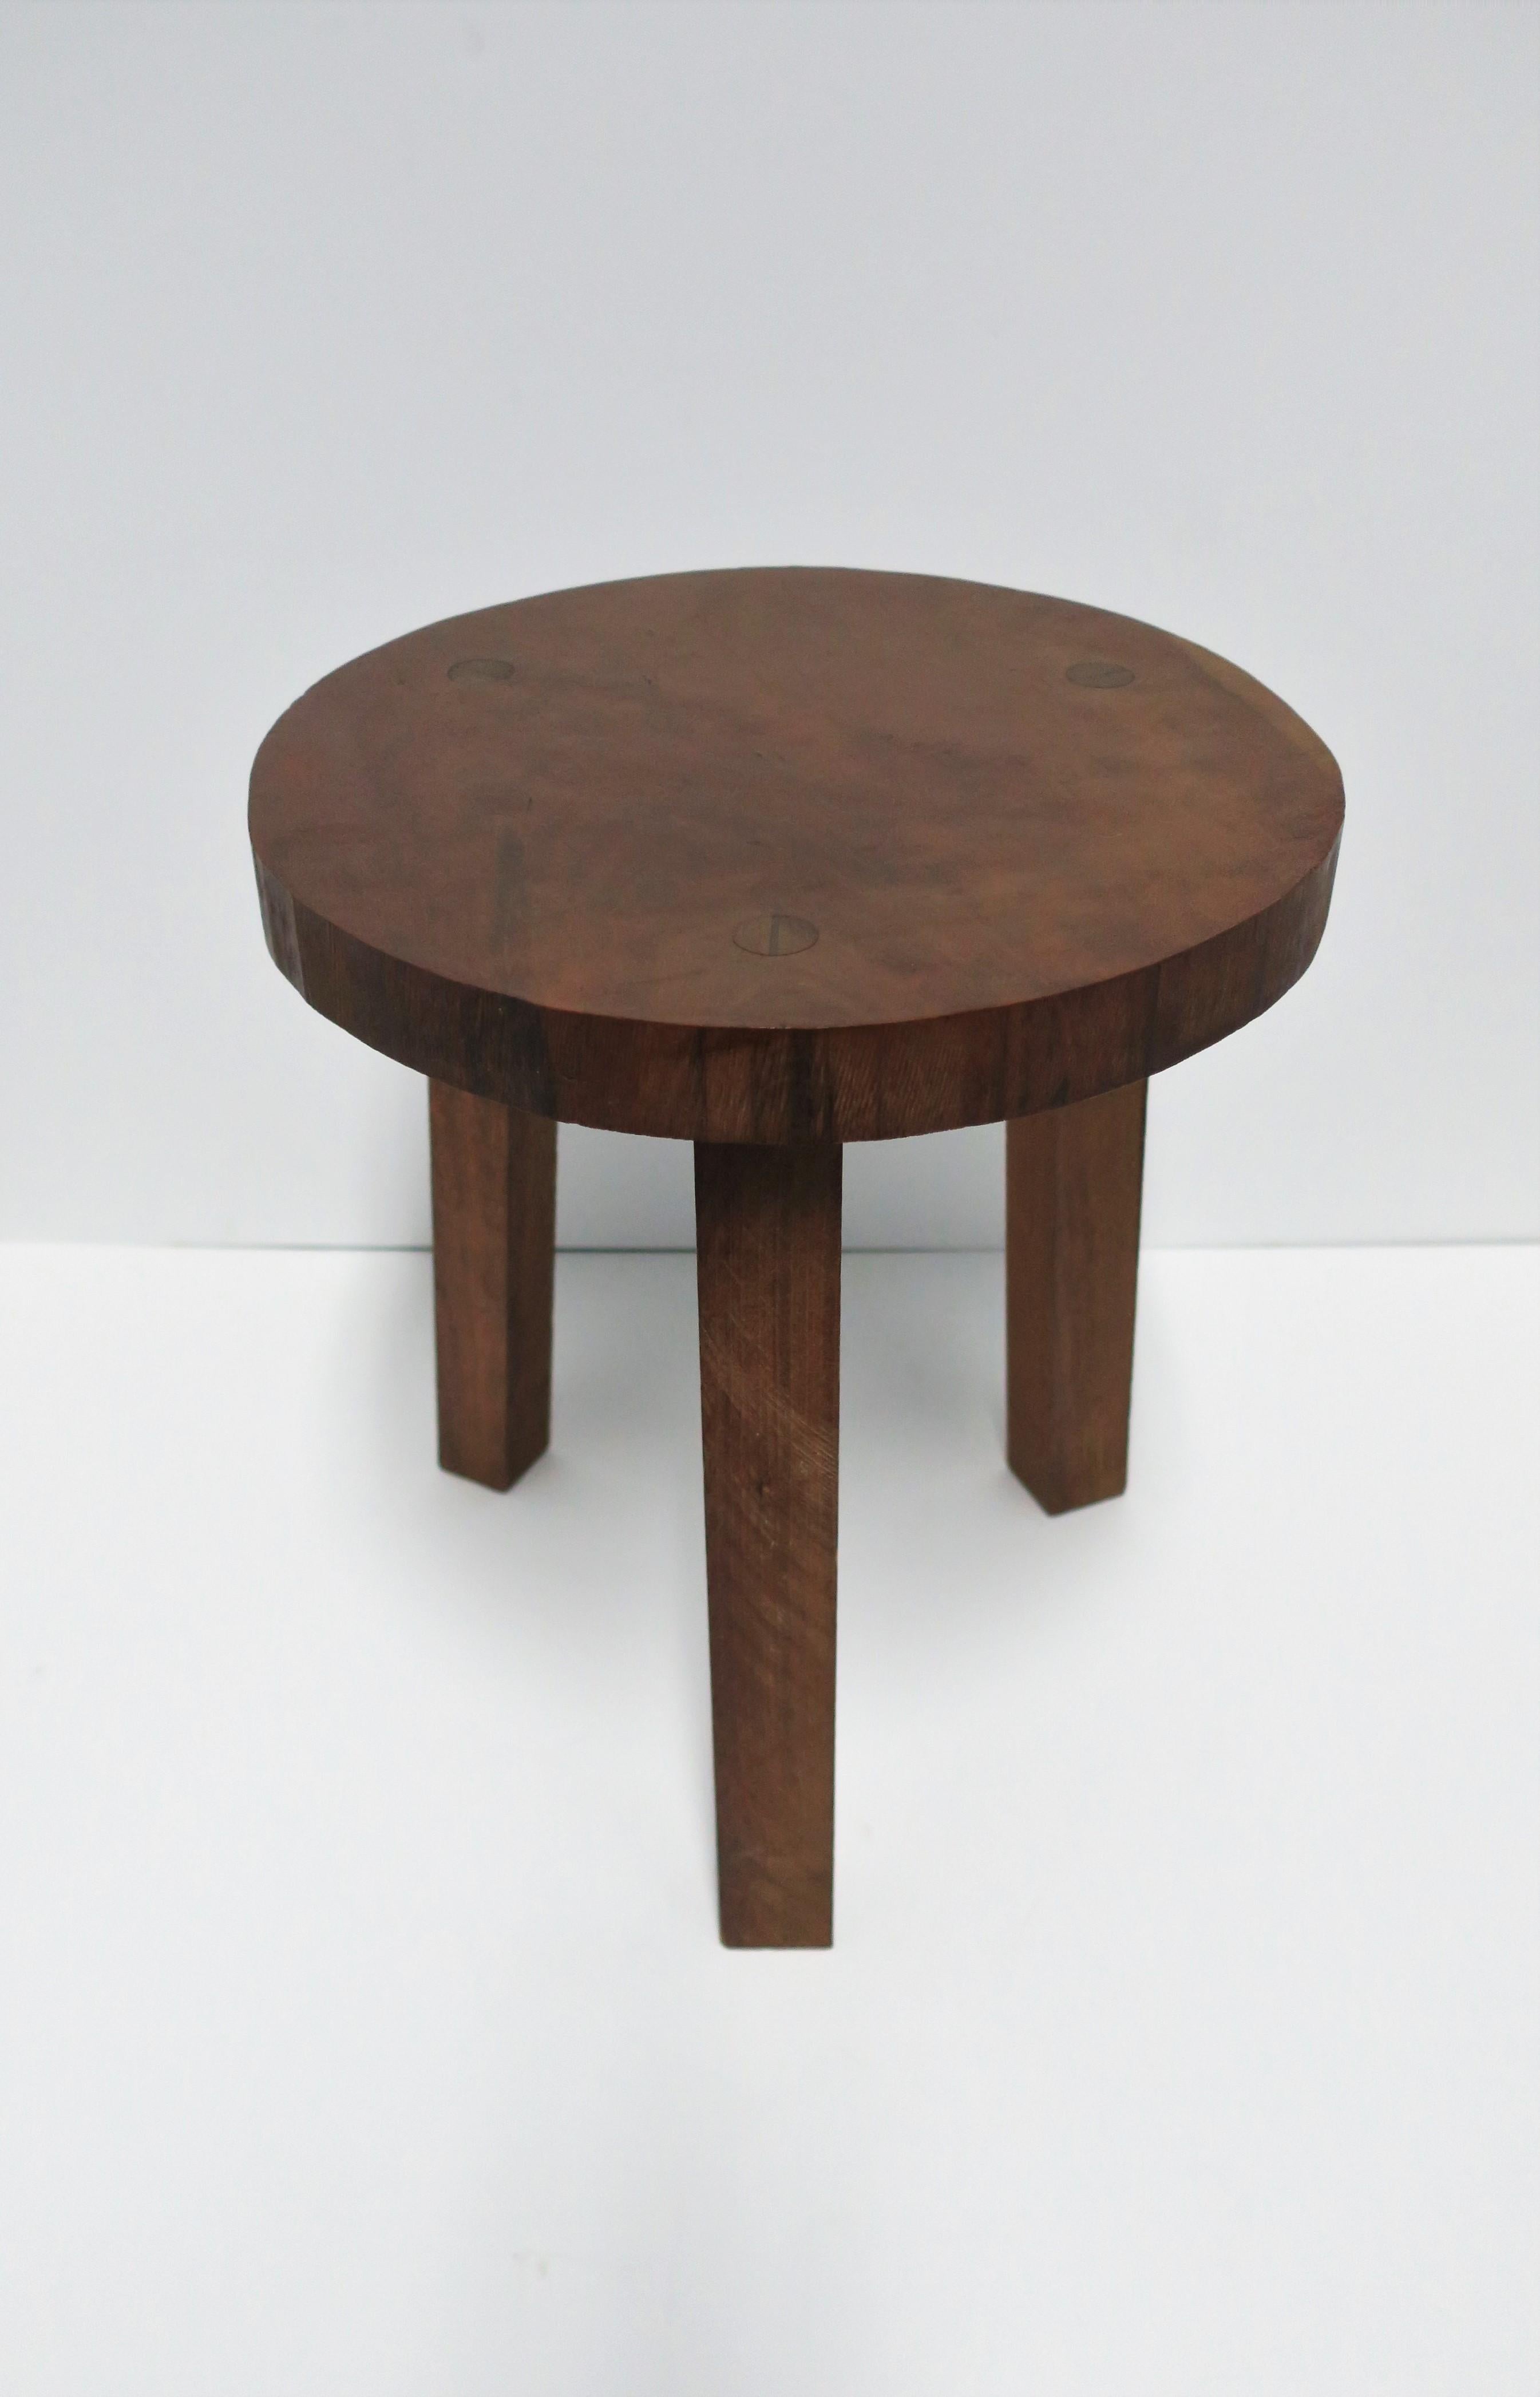 Hand-Crafted Wood Stool or Side Table with Tri-Pod Base For Sale